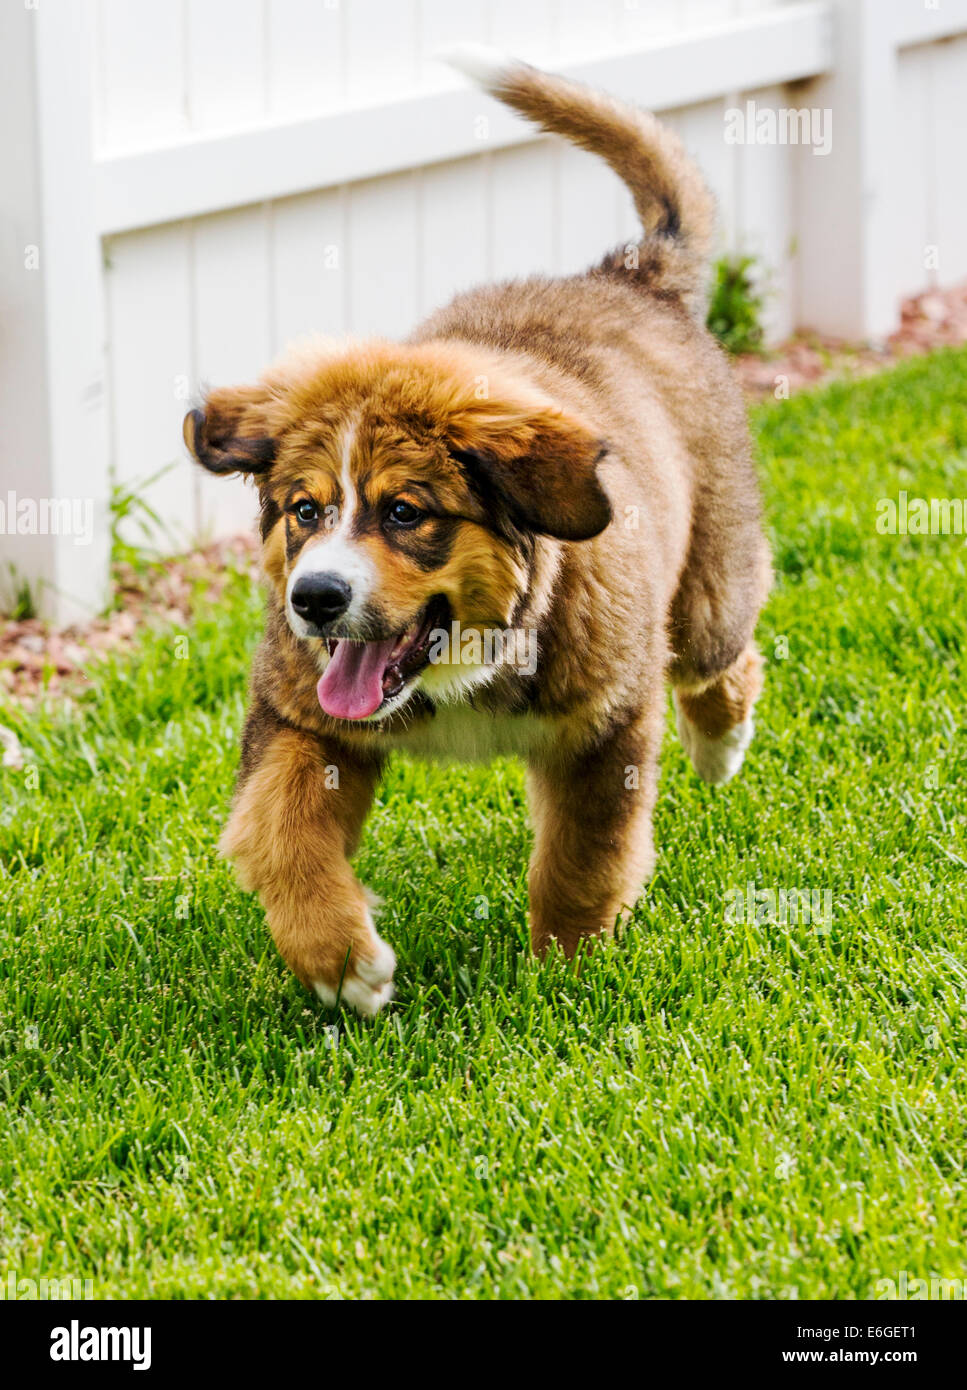 Twelve week old Bernese Mountain Dog, Great Pyrenees, mix breed, puppy running on grass Stock Photo